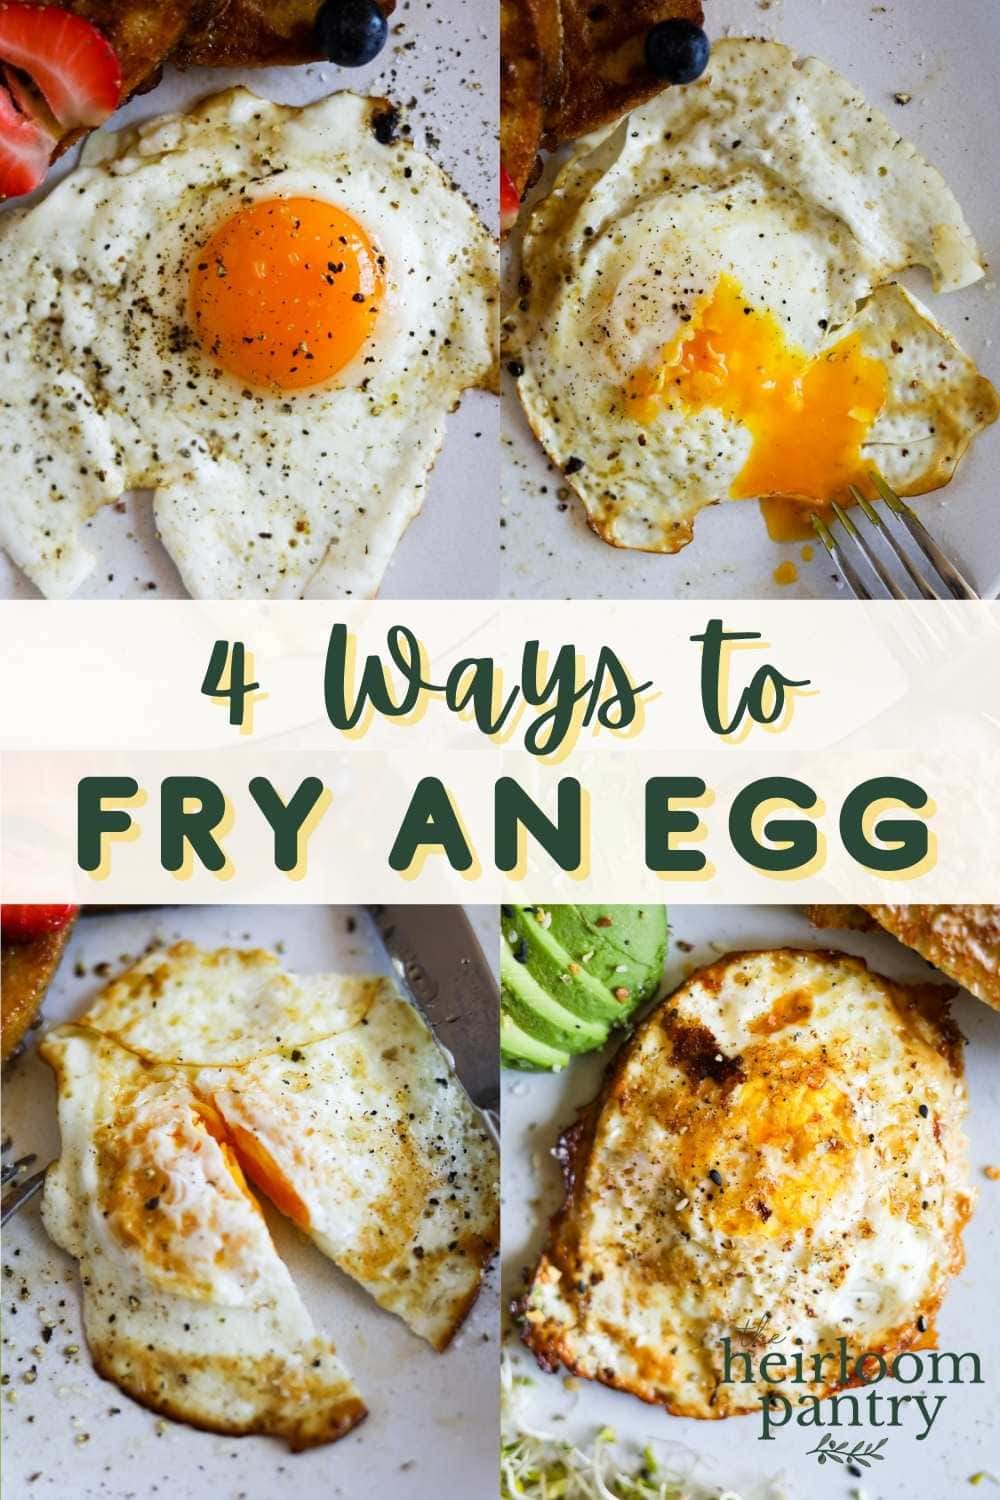 4 ways to perfectly fry an egg.